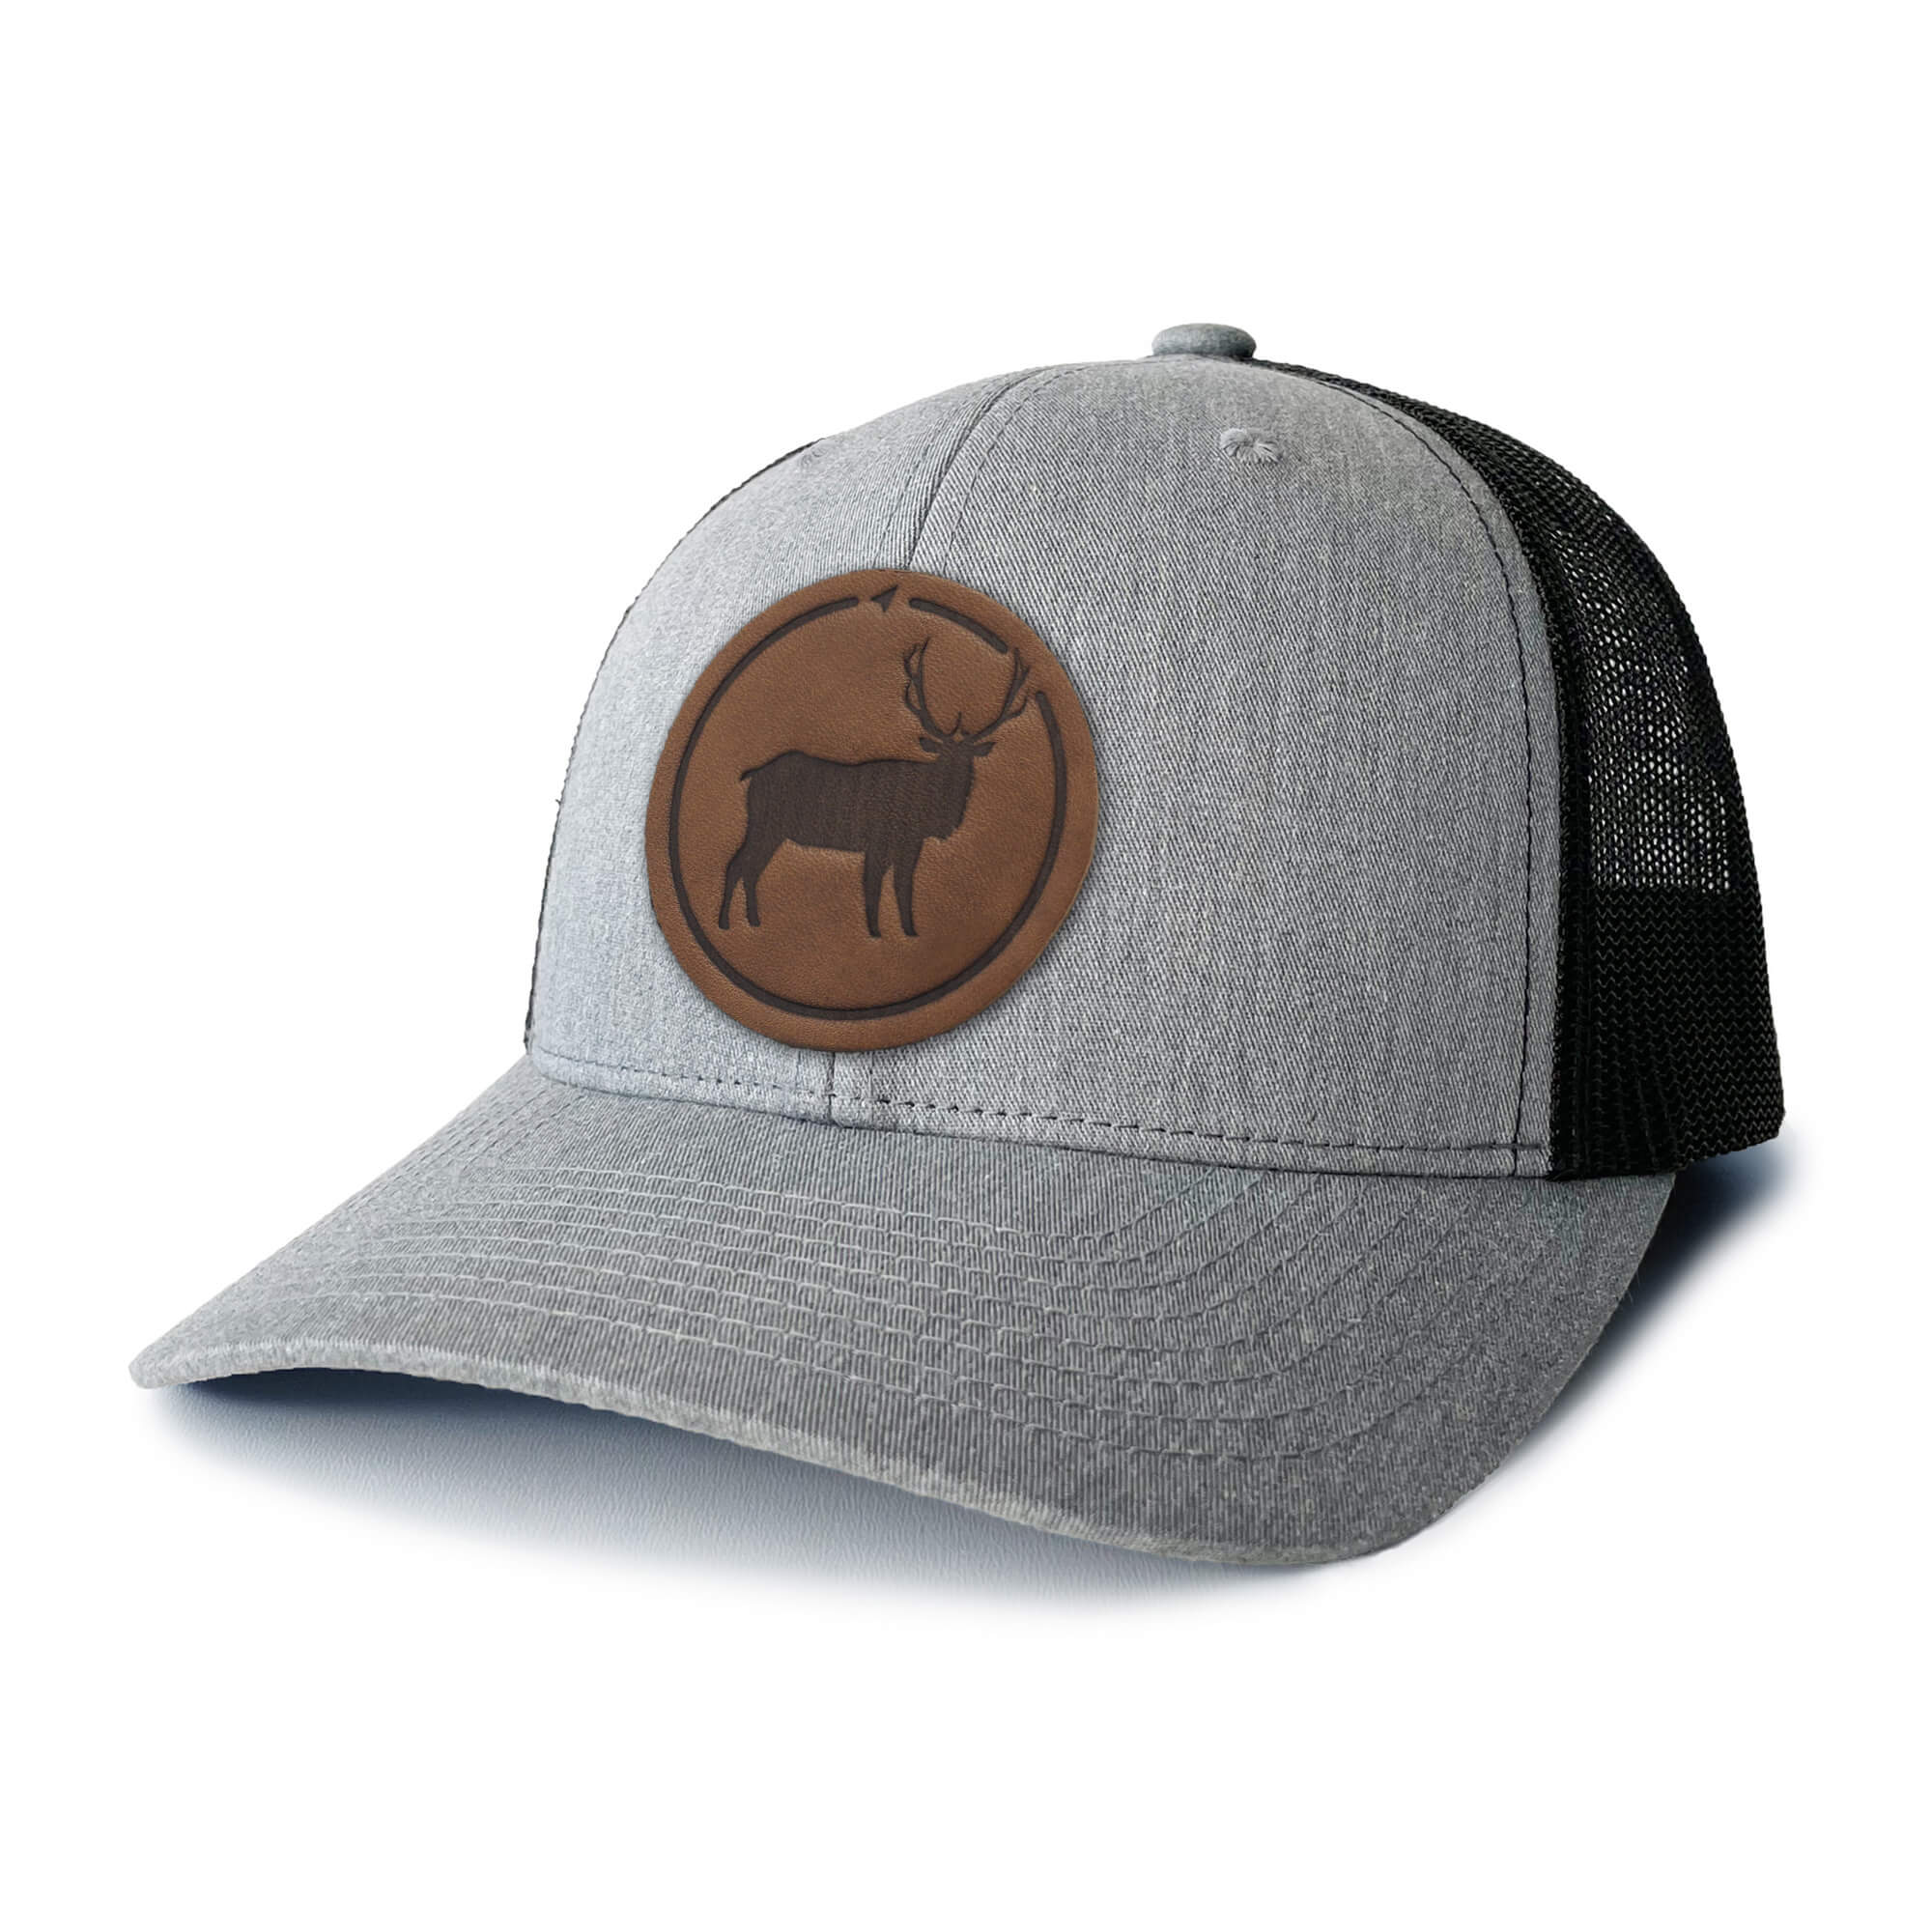 Heather Grey and white trucker hat with full-grain leather patch of Elk | BLACK-004-006, CHARC-004-006, NAVY-004-006, HGREY-004-006, MOSS-004-006, BROWN-004-006